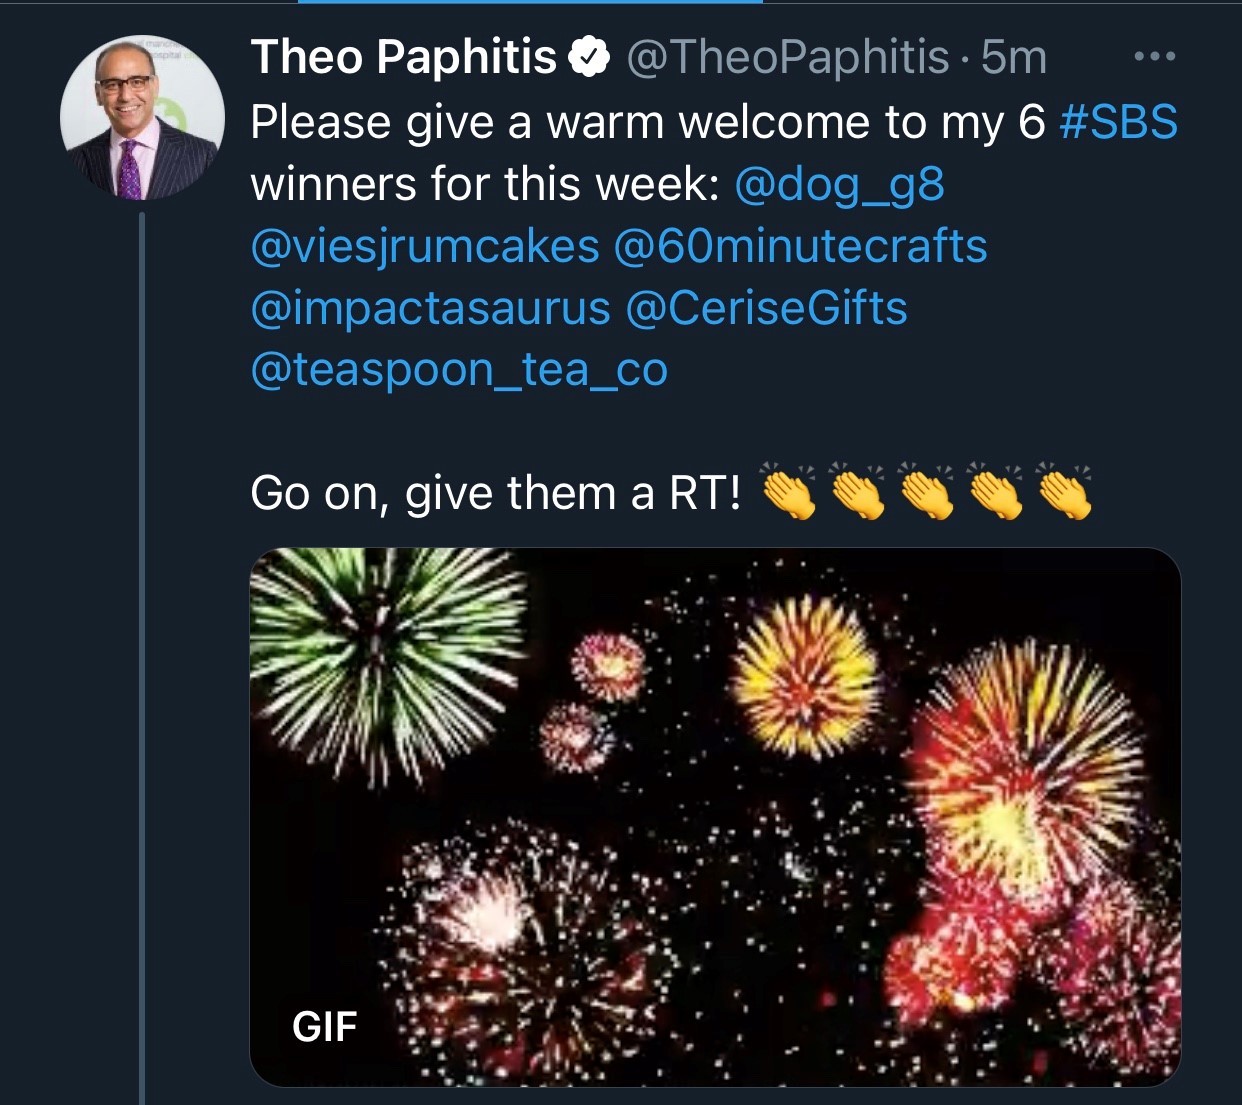 RECOGNISED: The business was chosen as a winner by Theo Paphitis